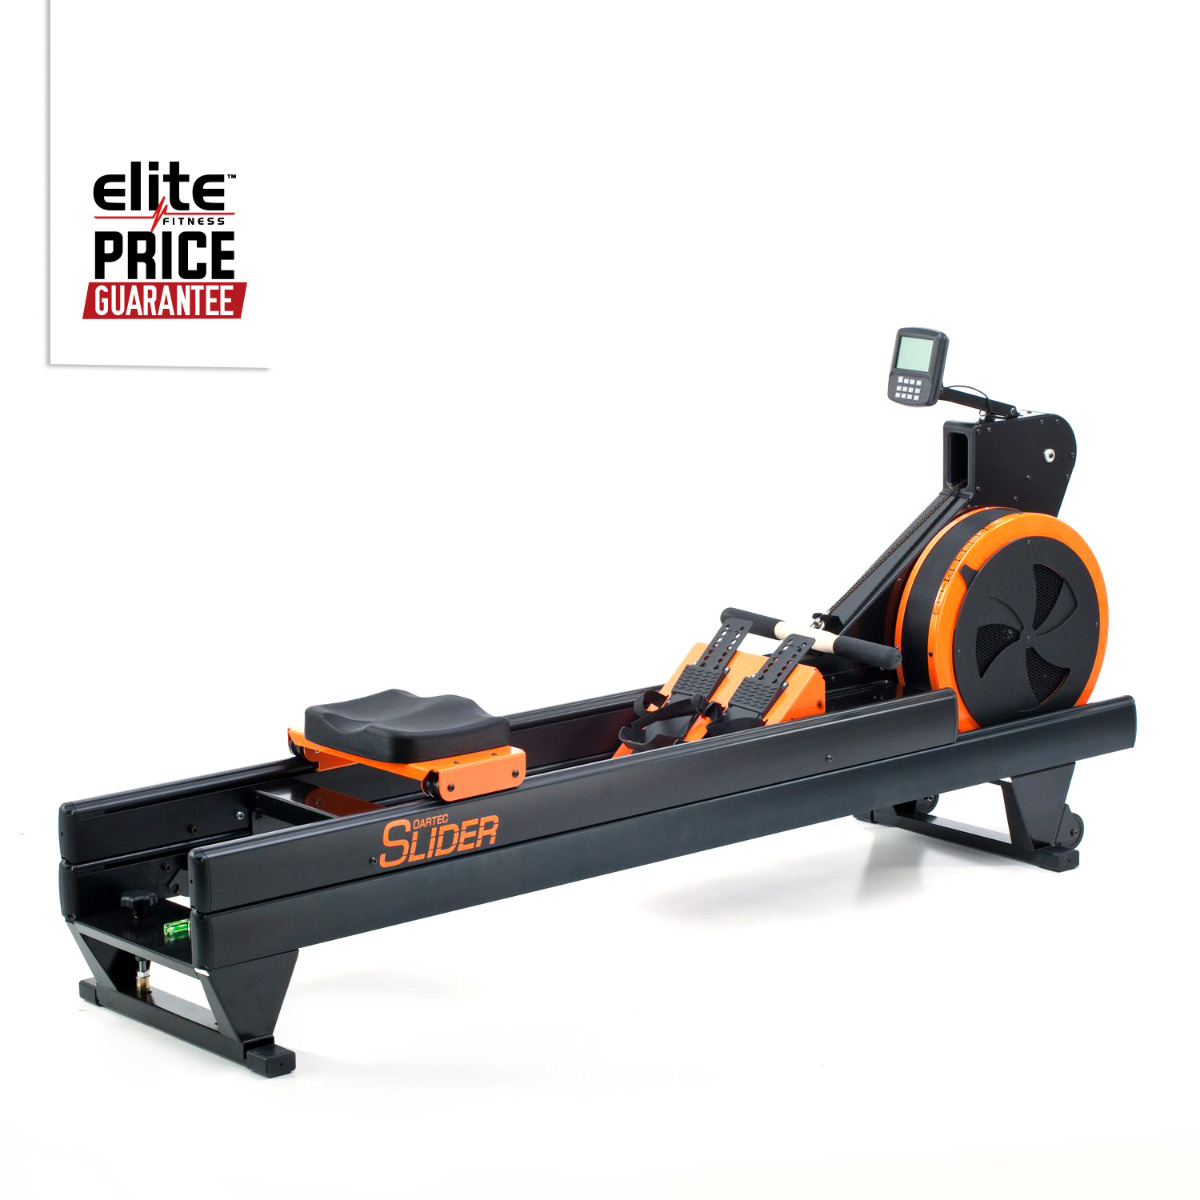 SLIDER ROWING MACHINE AVAILABLE IN ST JOHNS 